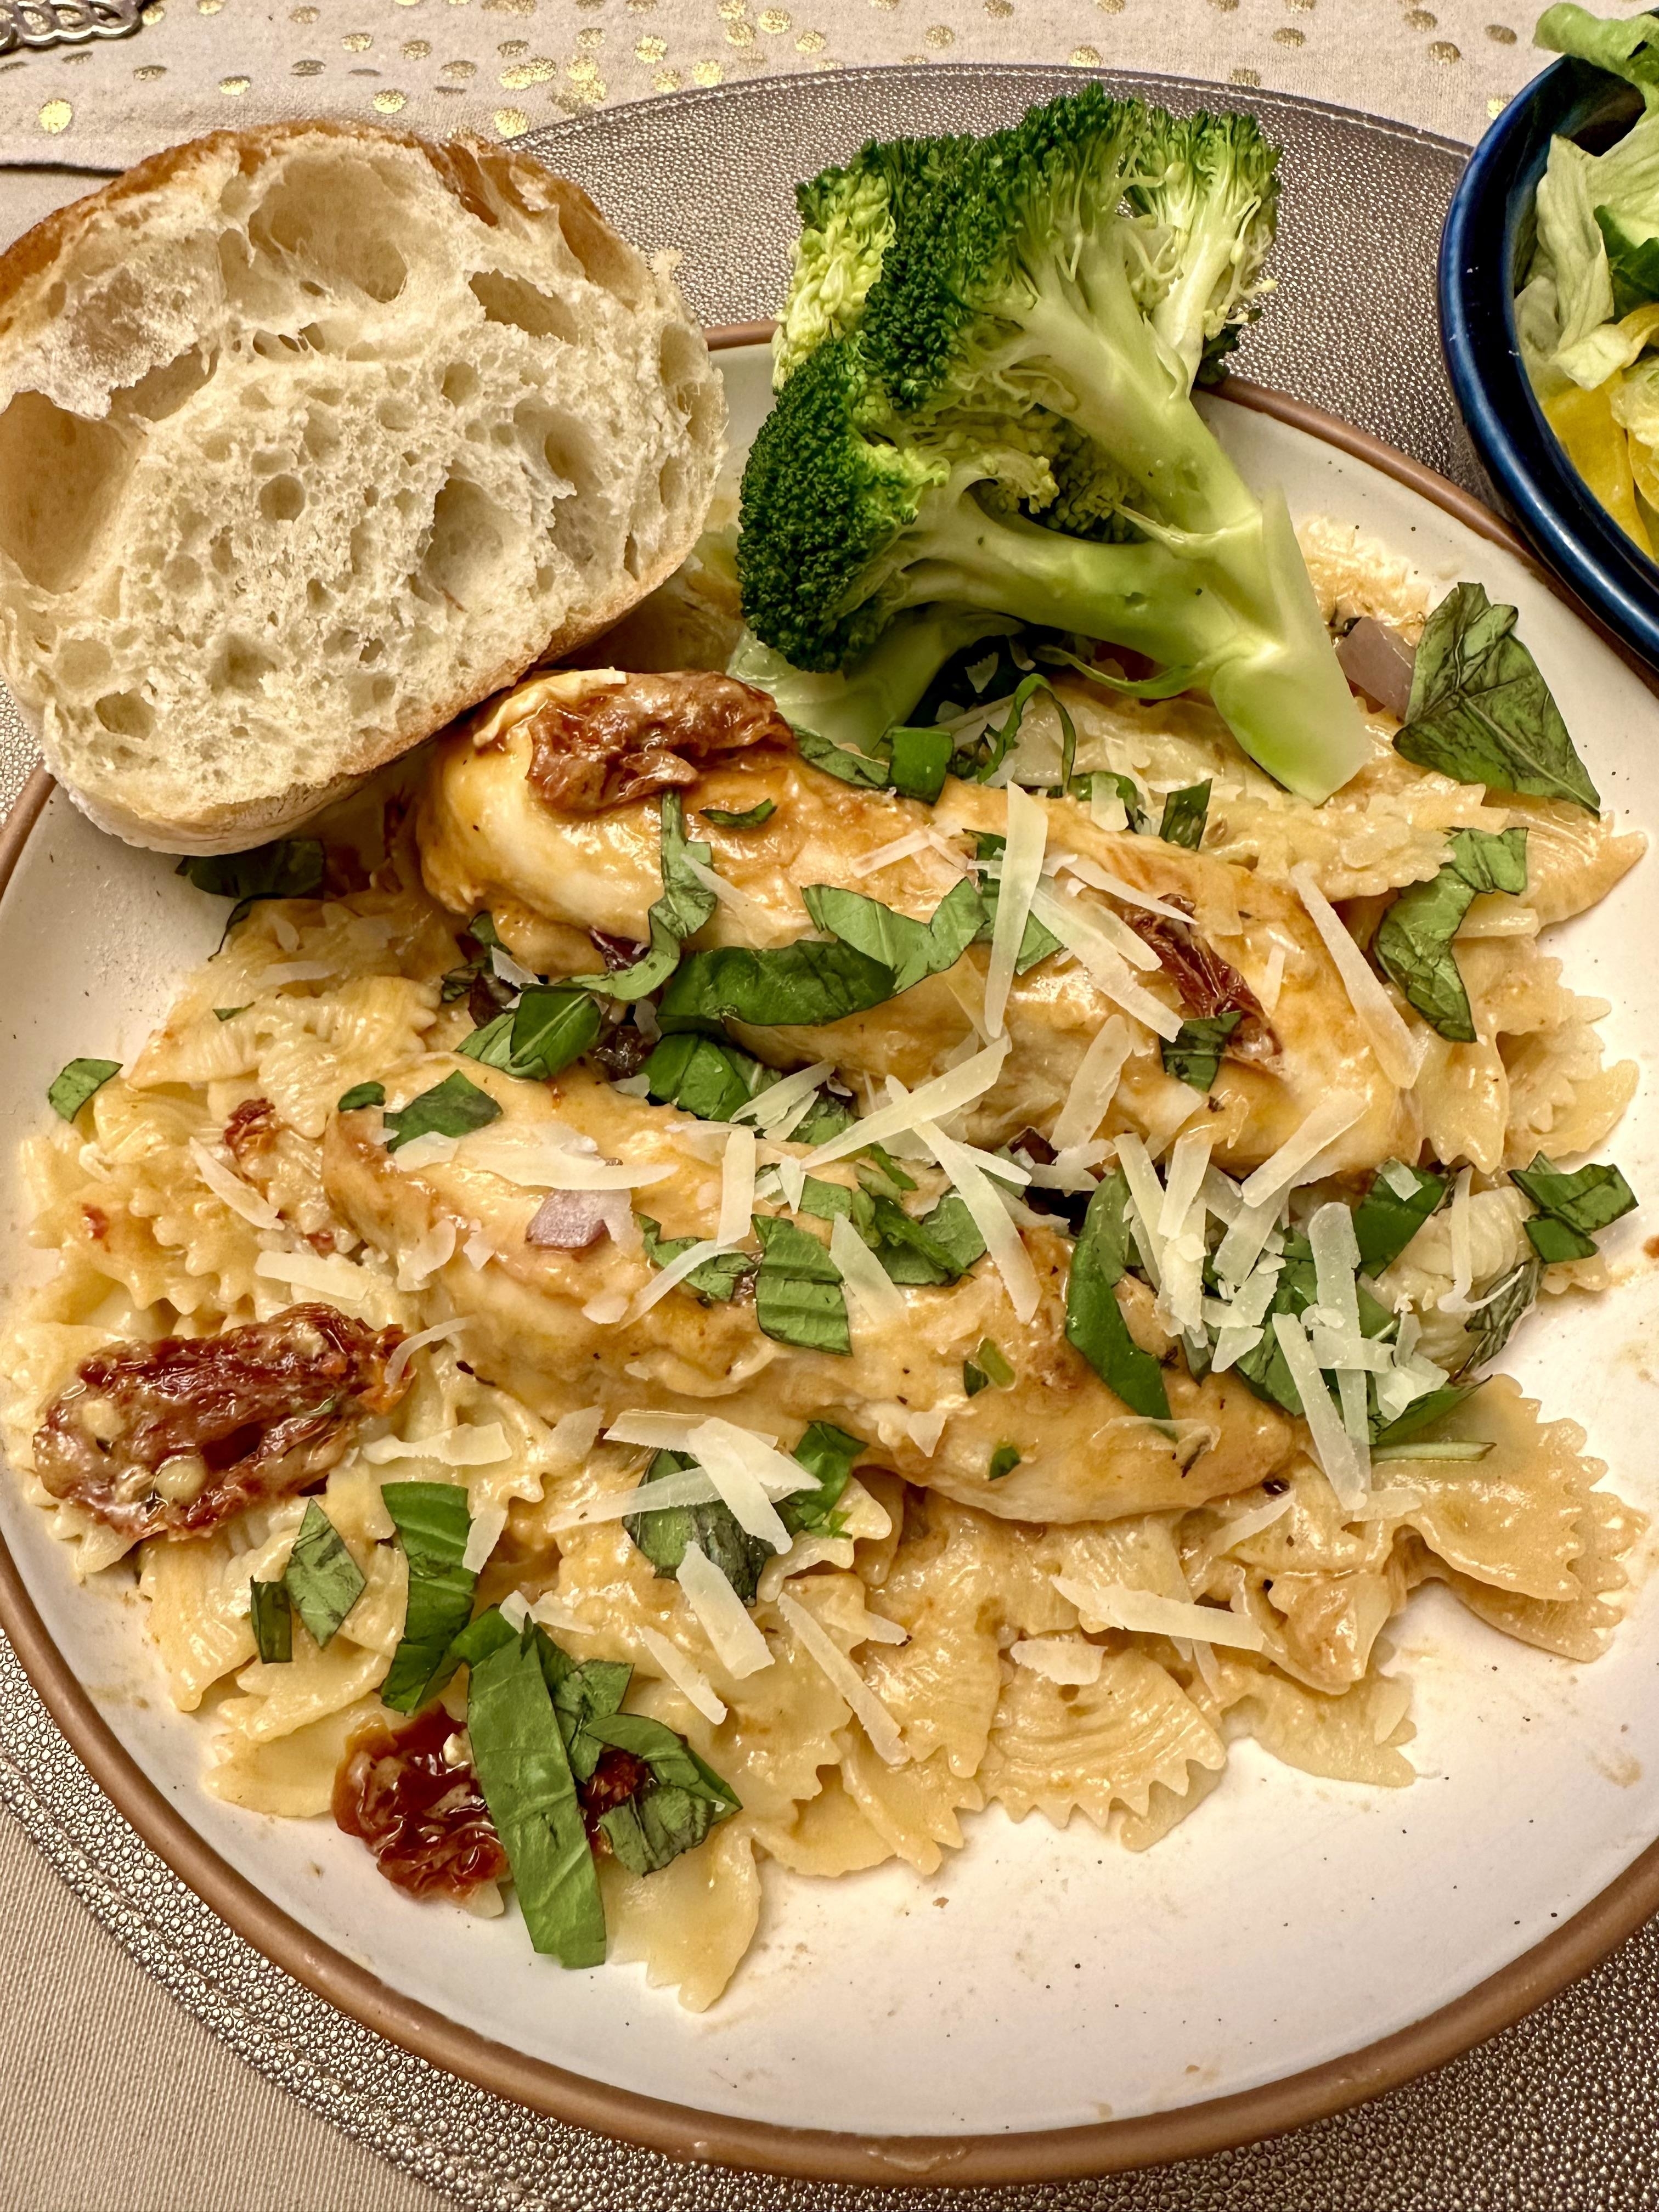 Plate with pasta, chicken, sun-dried tomatoes, broccoli, and topped with shredded cheese and basil